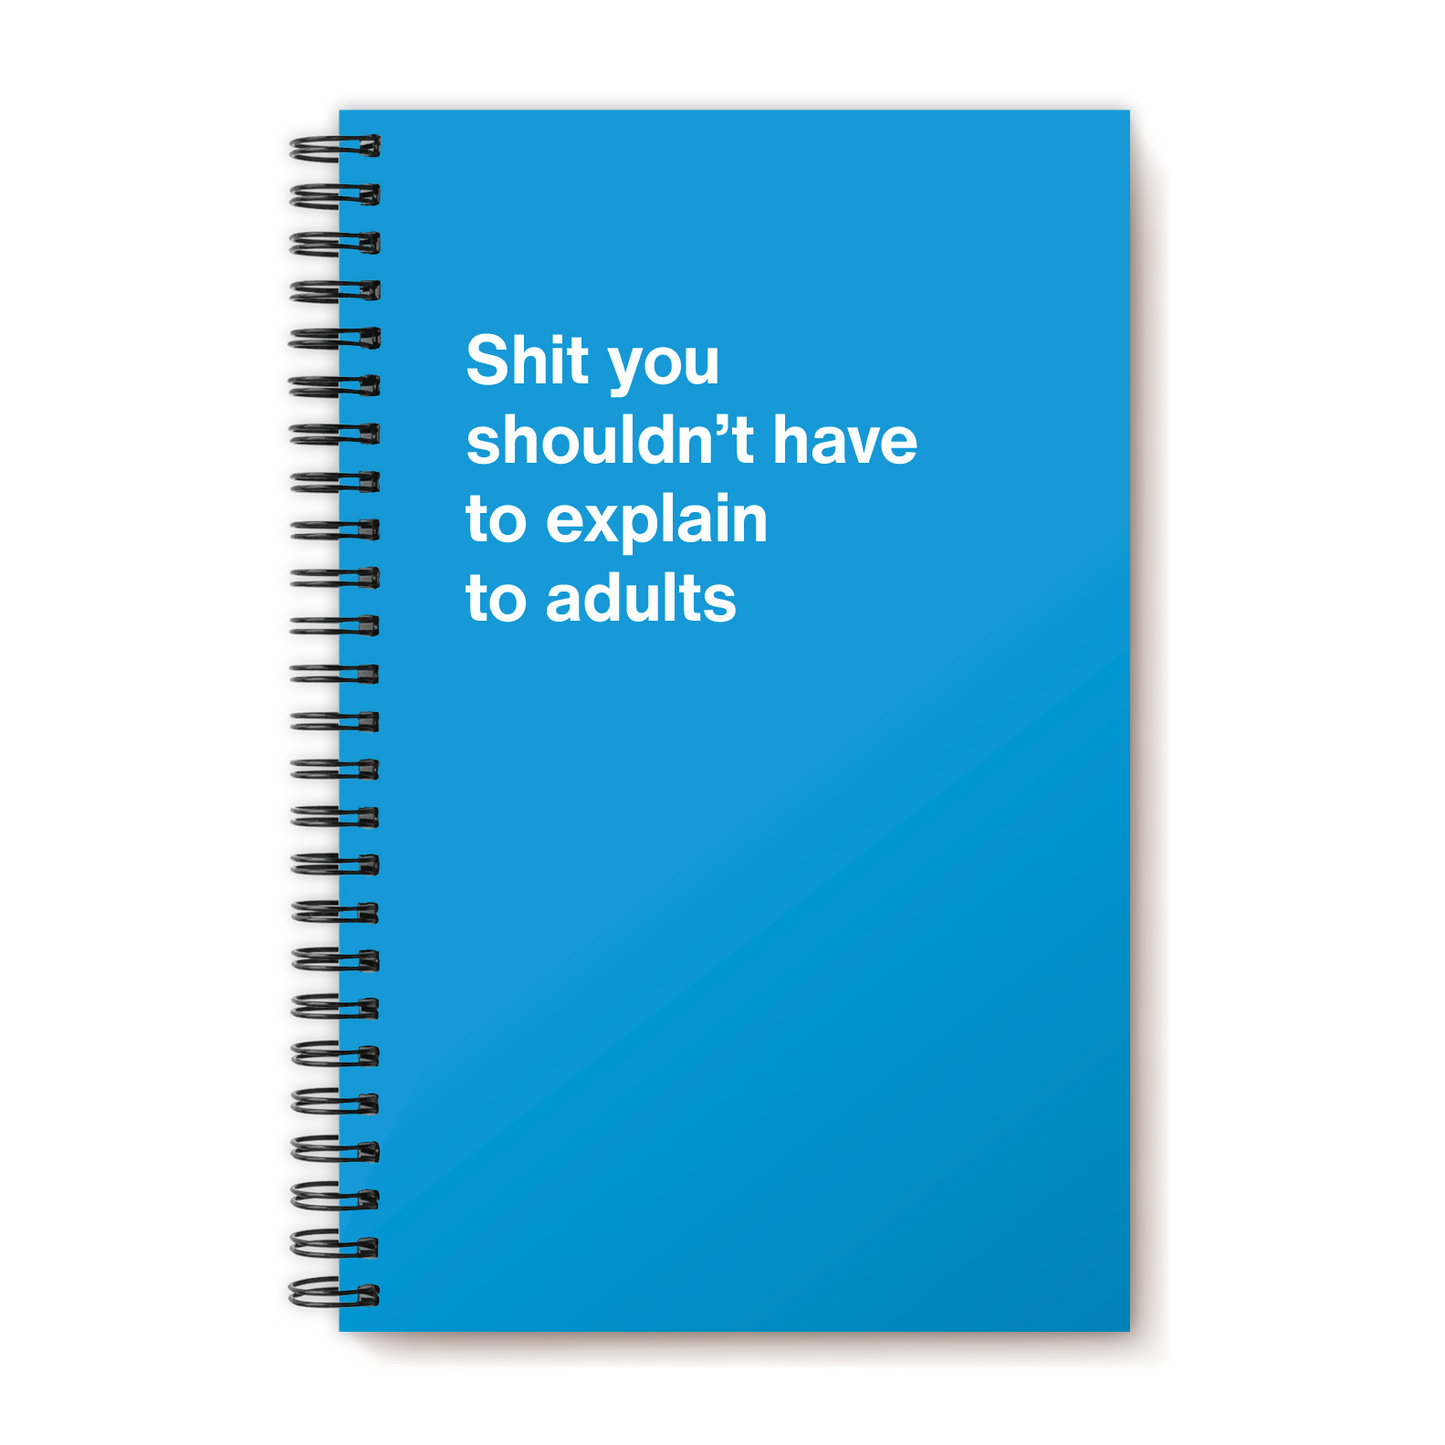 Shit you shouldn’t have to explain to adults | WTF Notebooks